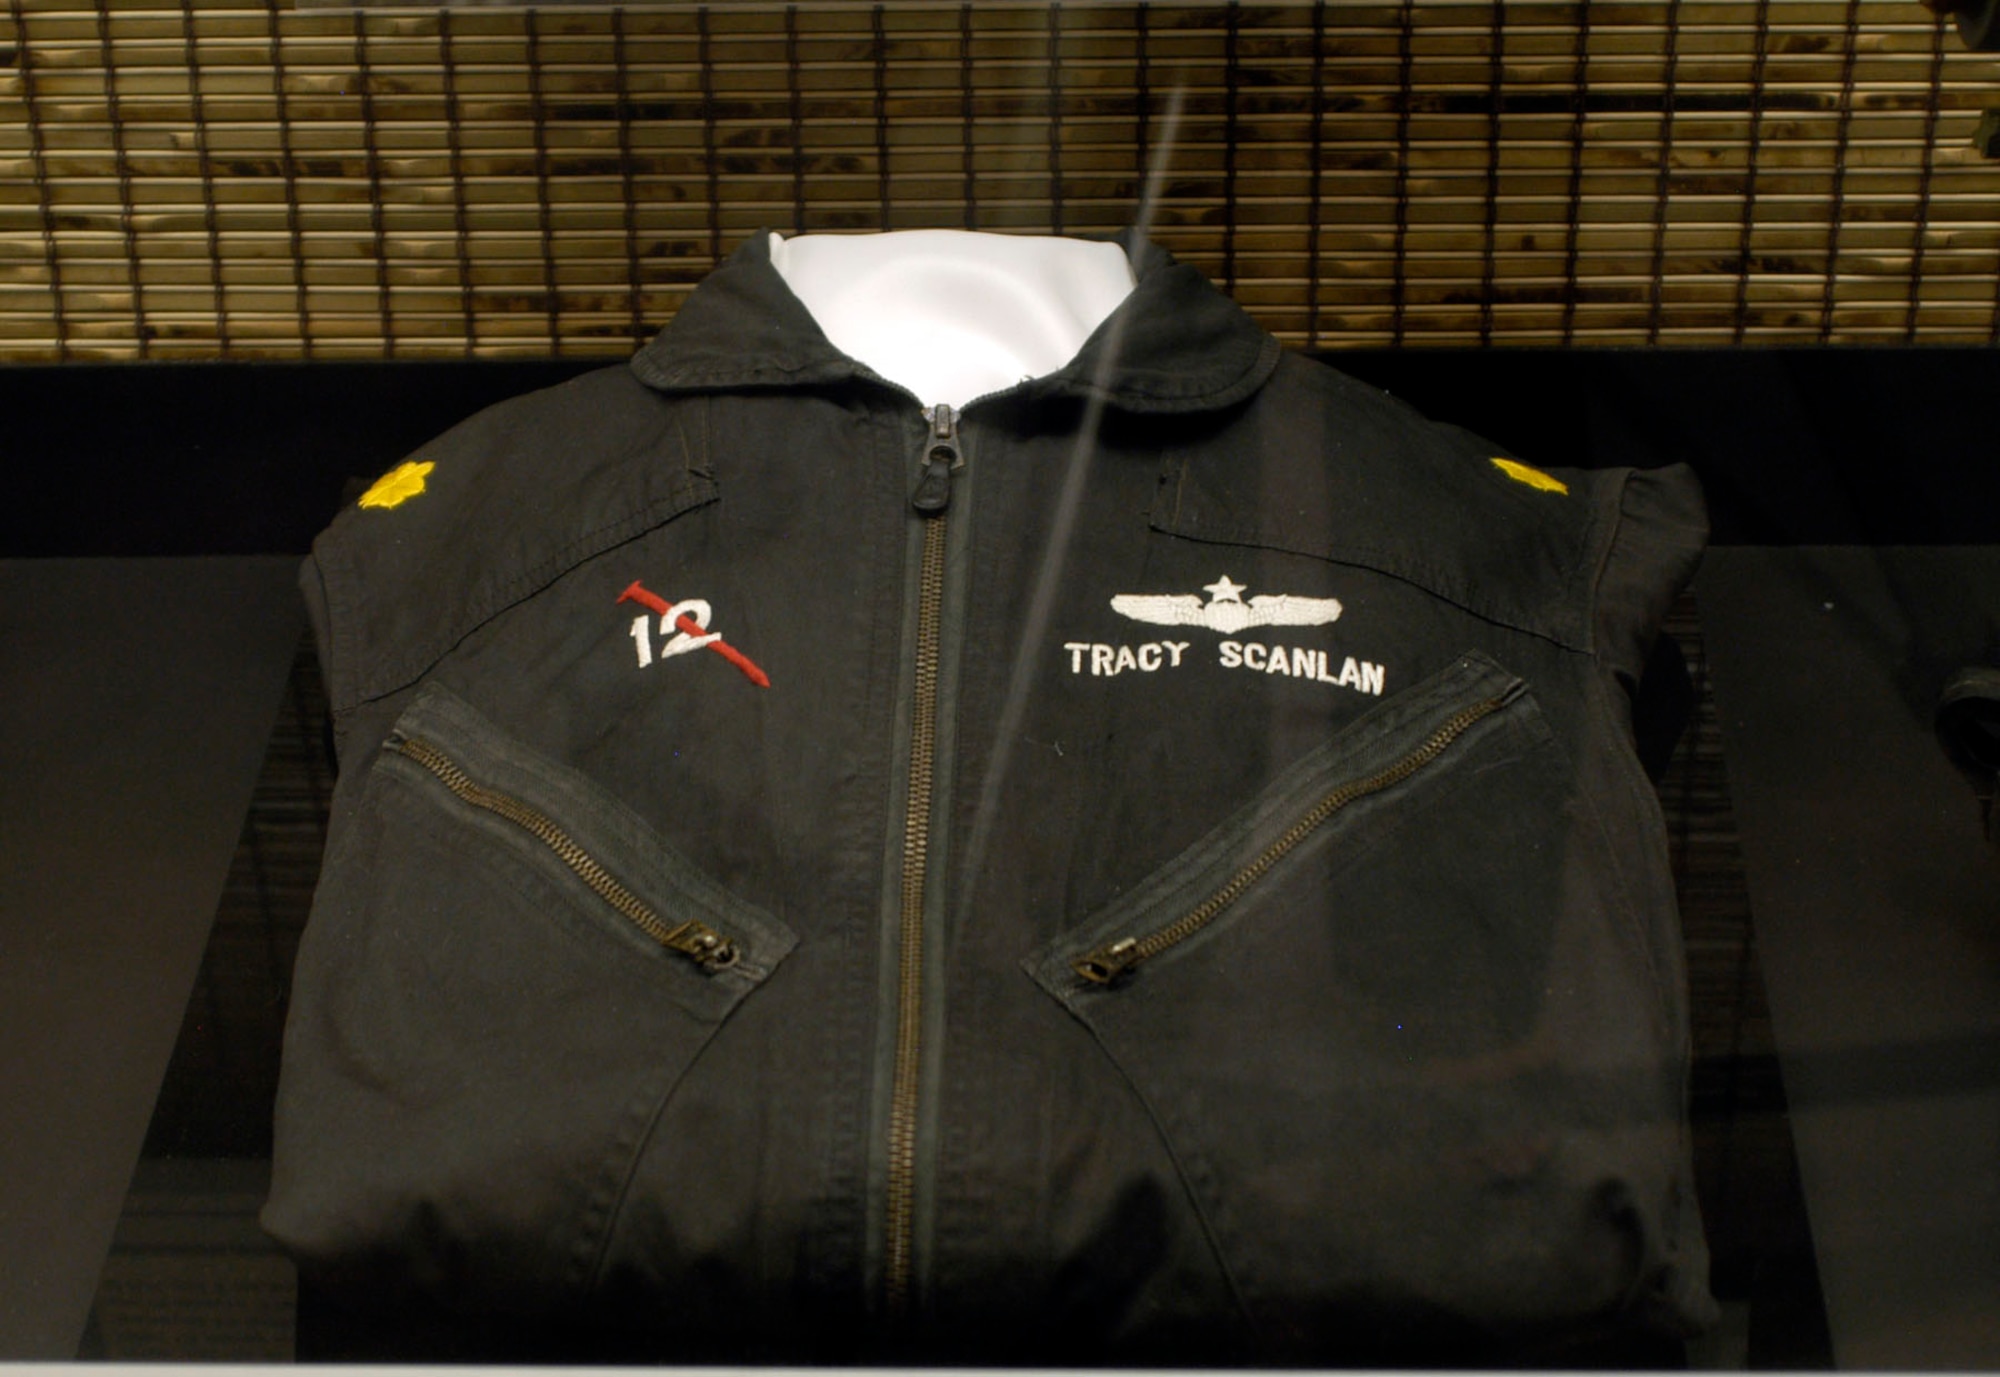 DAYTON, Ohio - Black flying coveralls worn by Maj. Tracy A. Scanlan (later Lt. Col.) on night FAC missions along the Ho Chi Minh Trail in 1968. Flying an O-2 with the 23rd TASS, he normally would not have worn the bright major’s insignia on night missions. This uniform is on display in the Southeast Asia War Gallery at the National Museum of the U.S. Air Force. (U.S. Air Force photo)